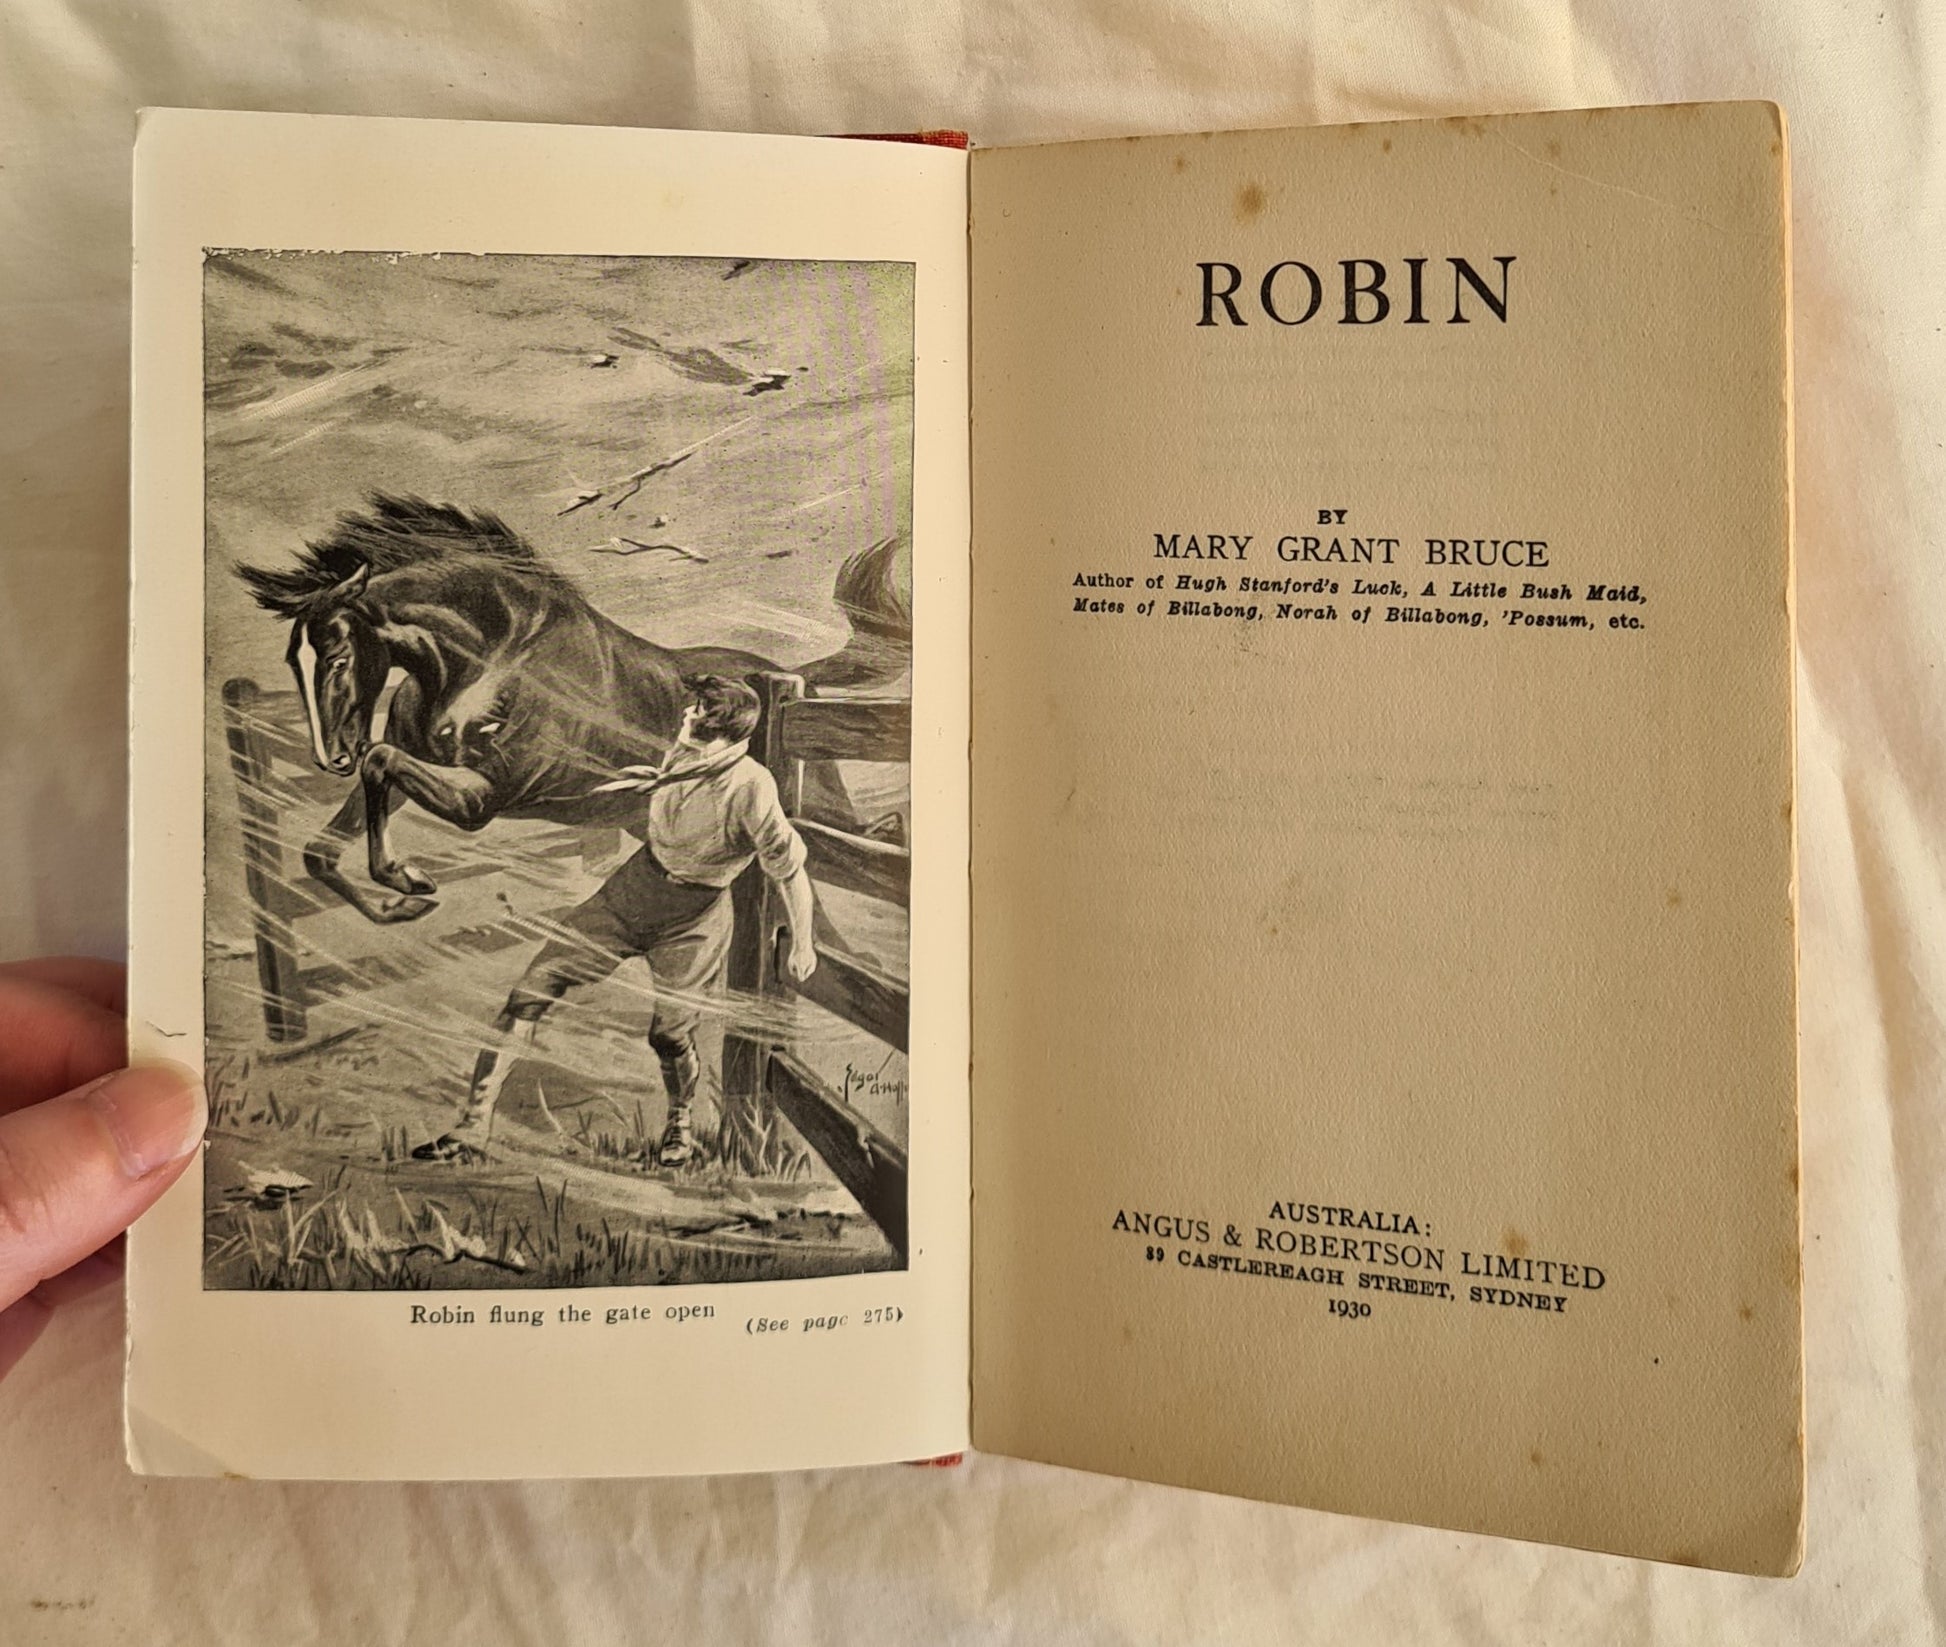 Robin by Mary Grant Bruce (1930)